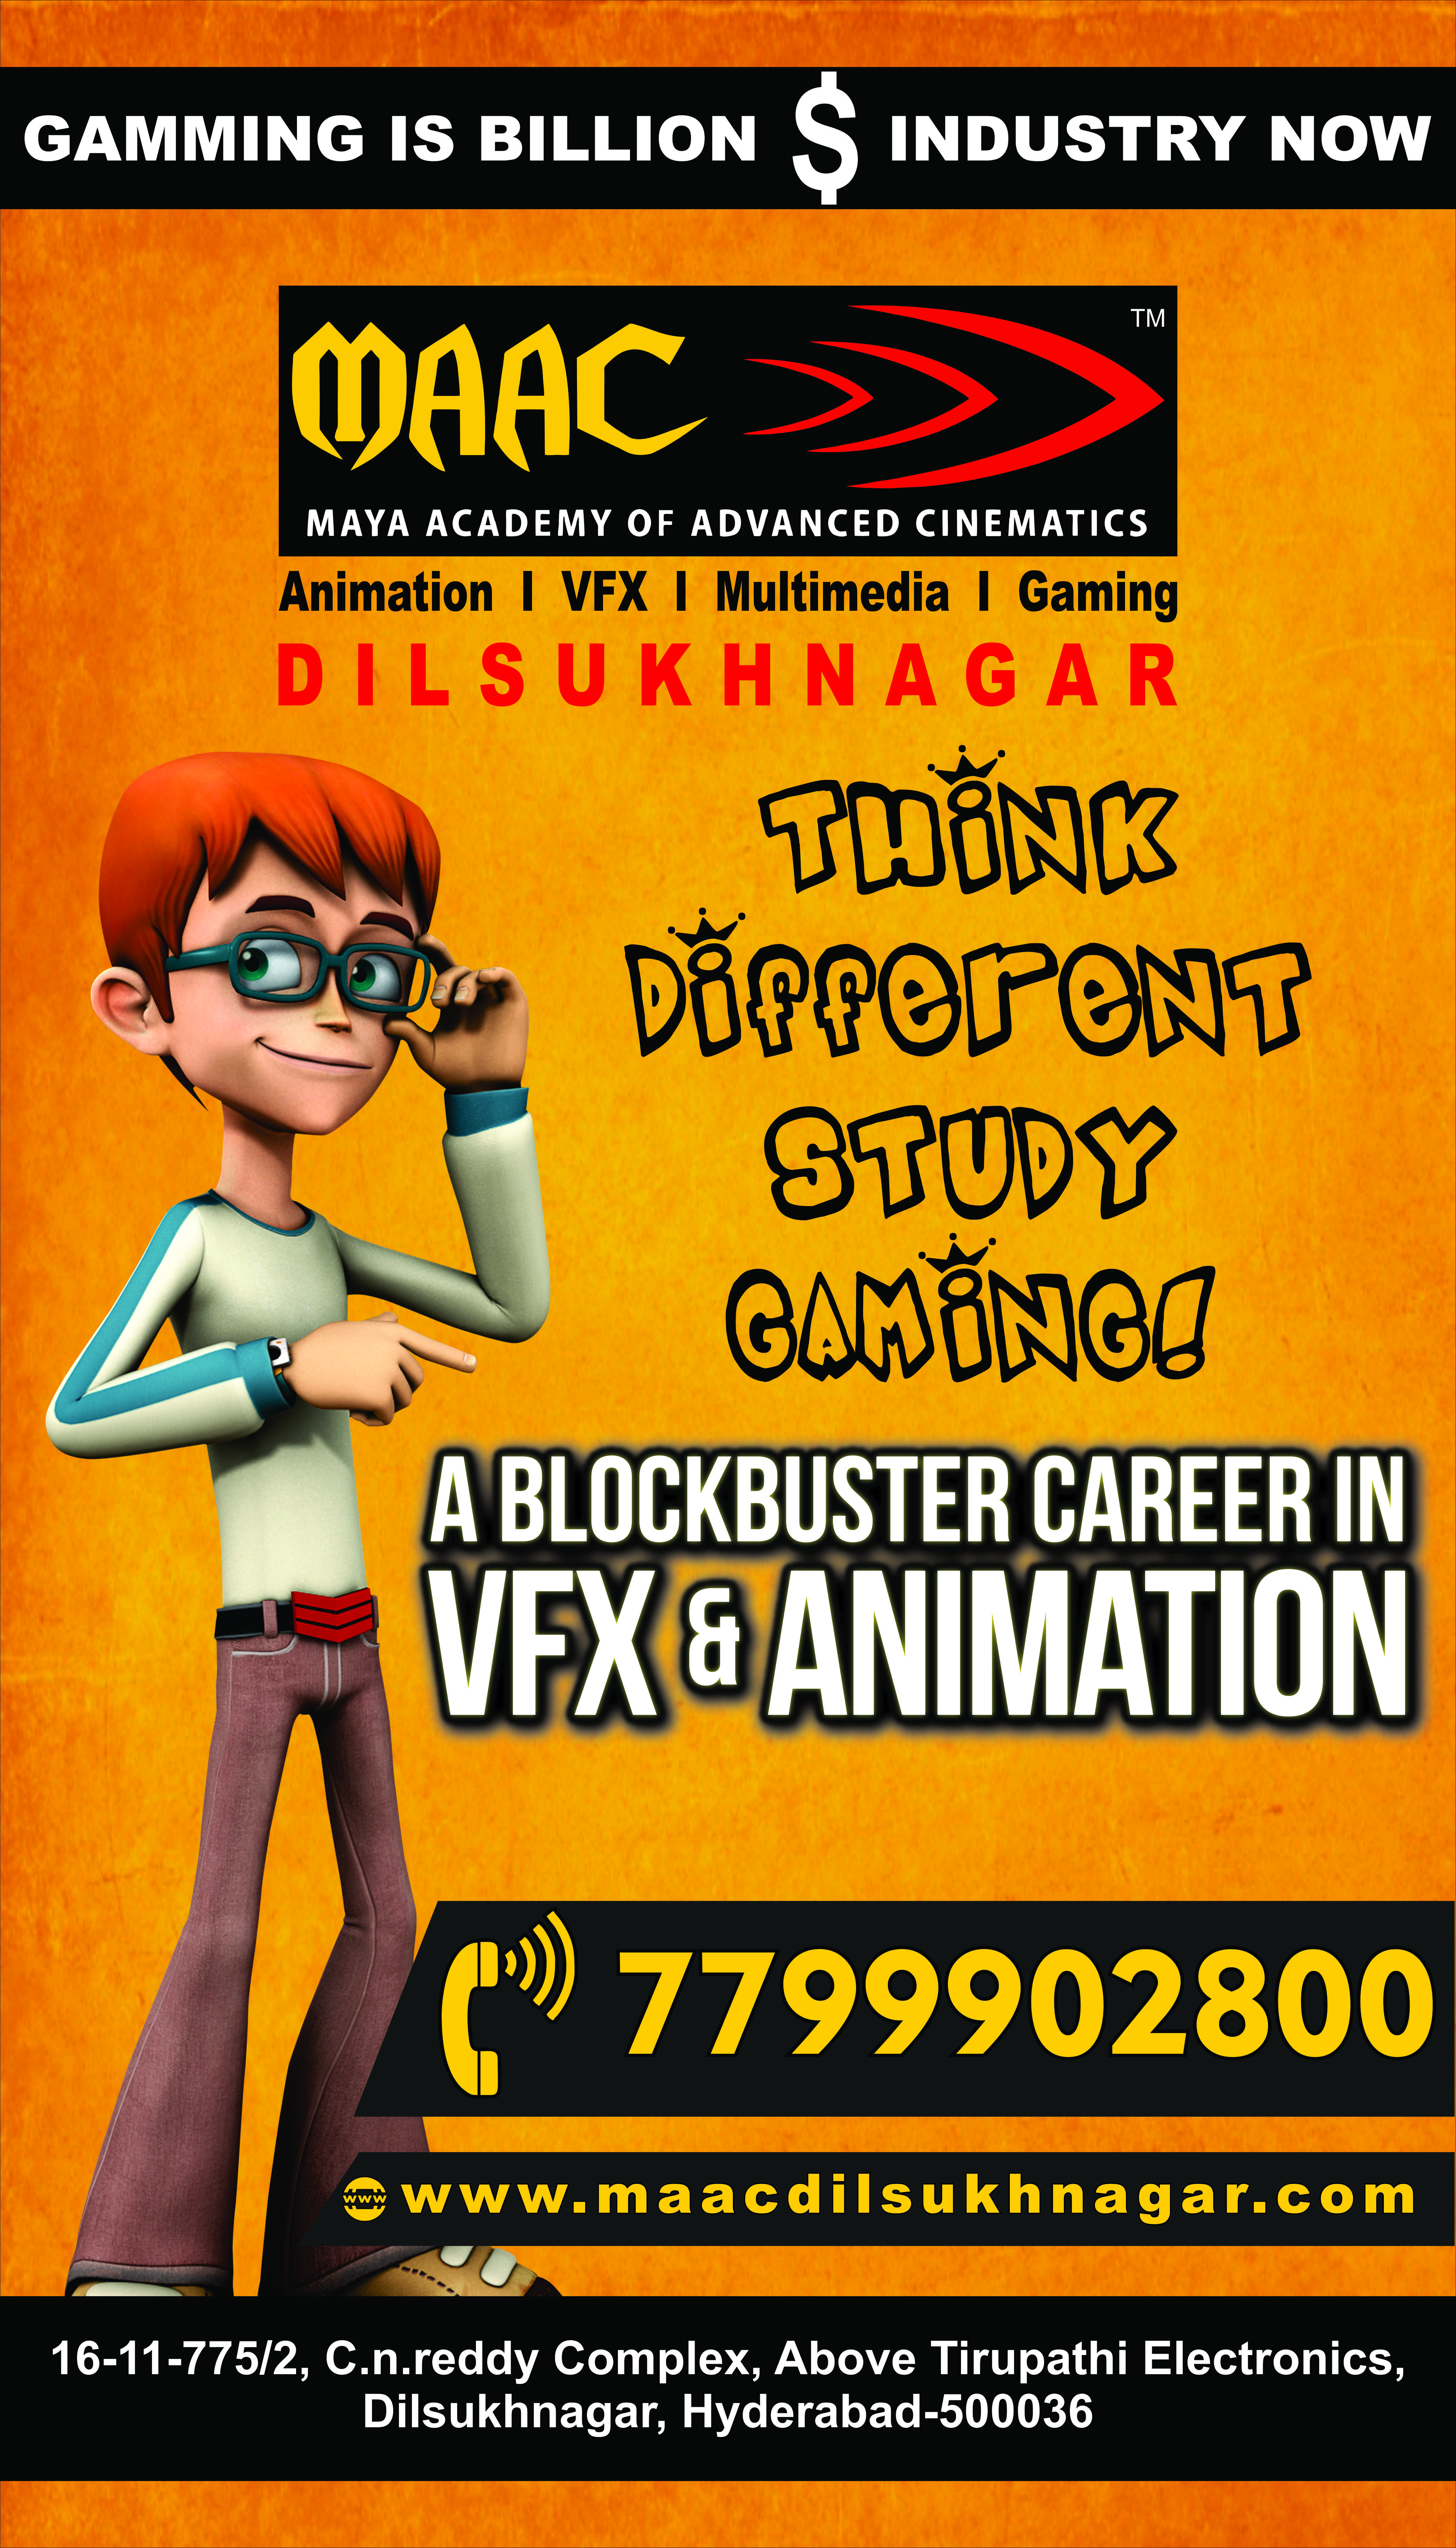 Reasons to choose animation as your career option | MAAC DILSUKHNAGAR